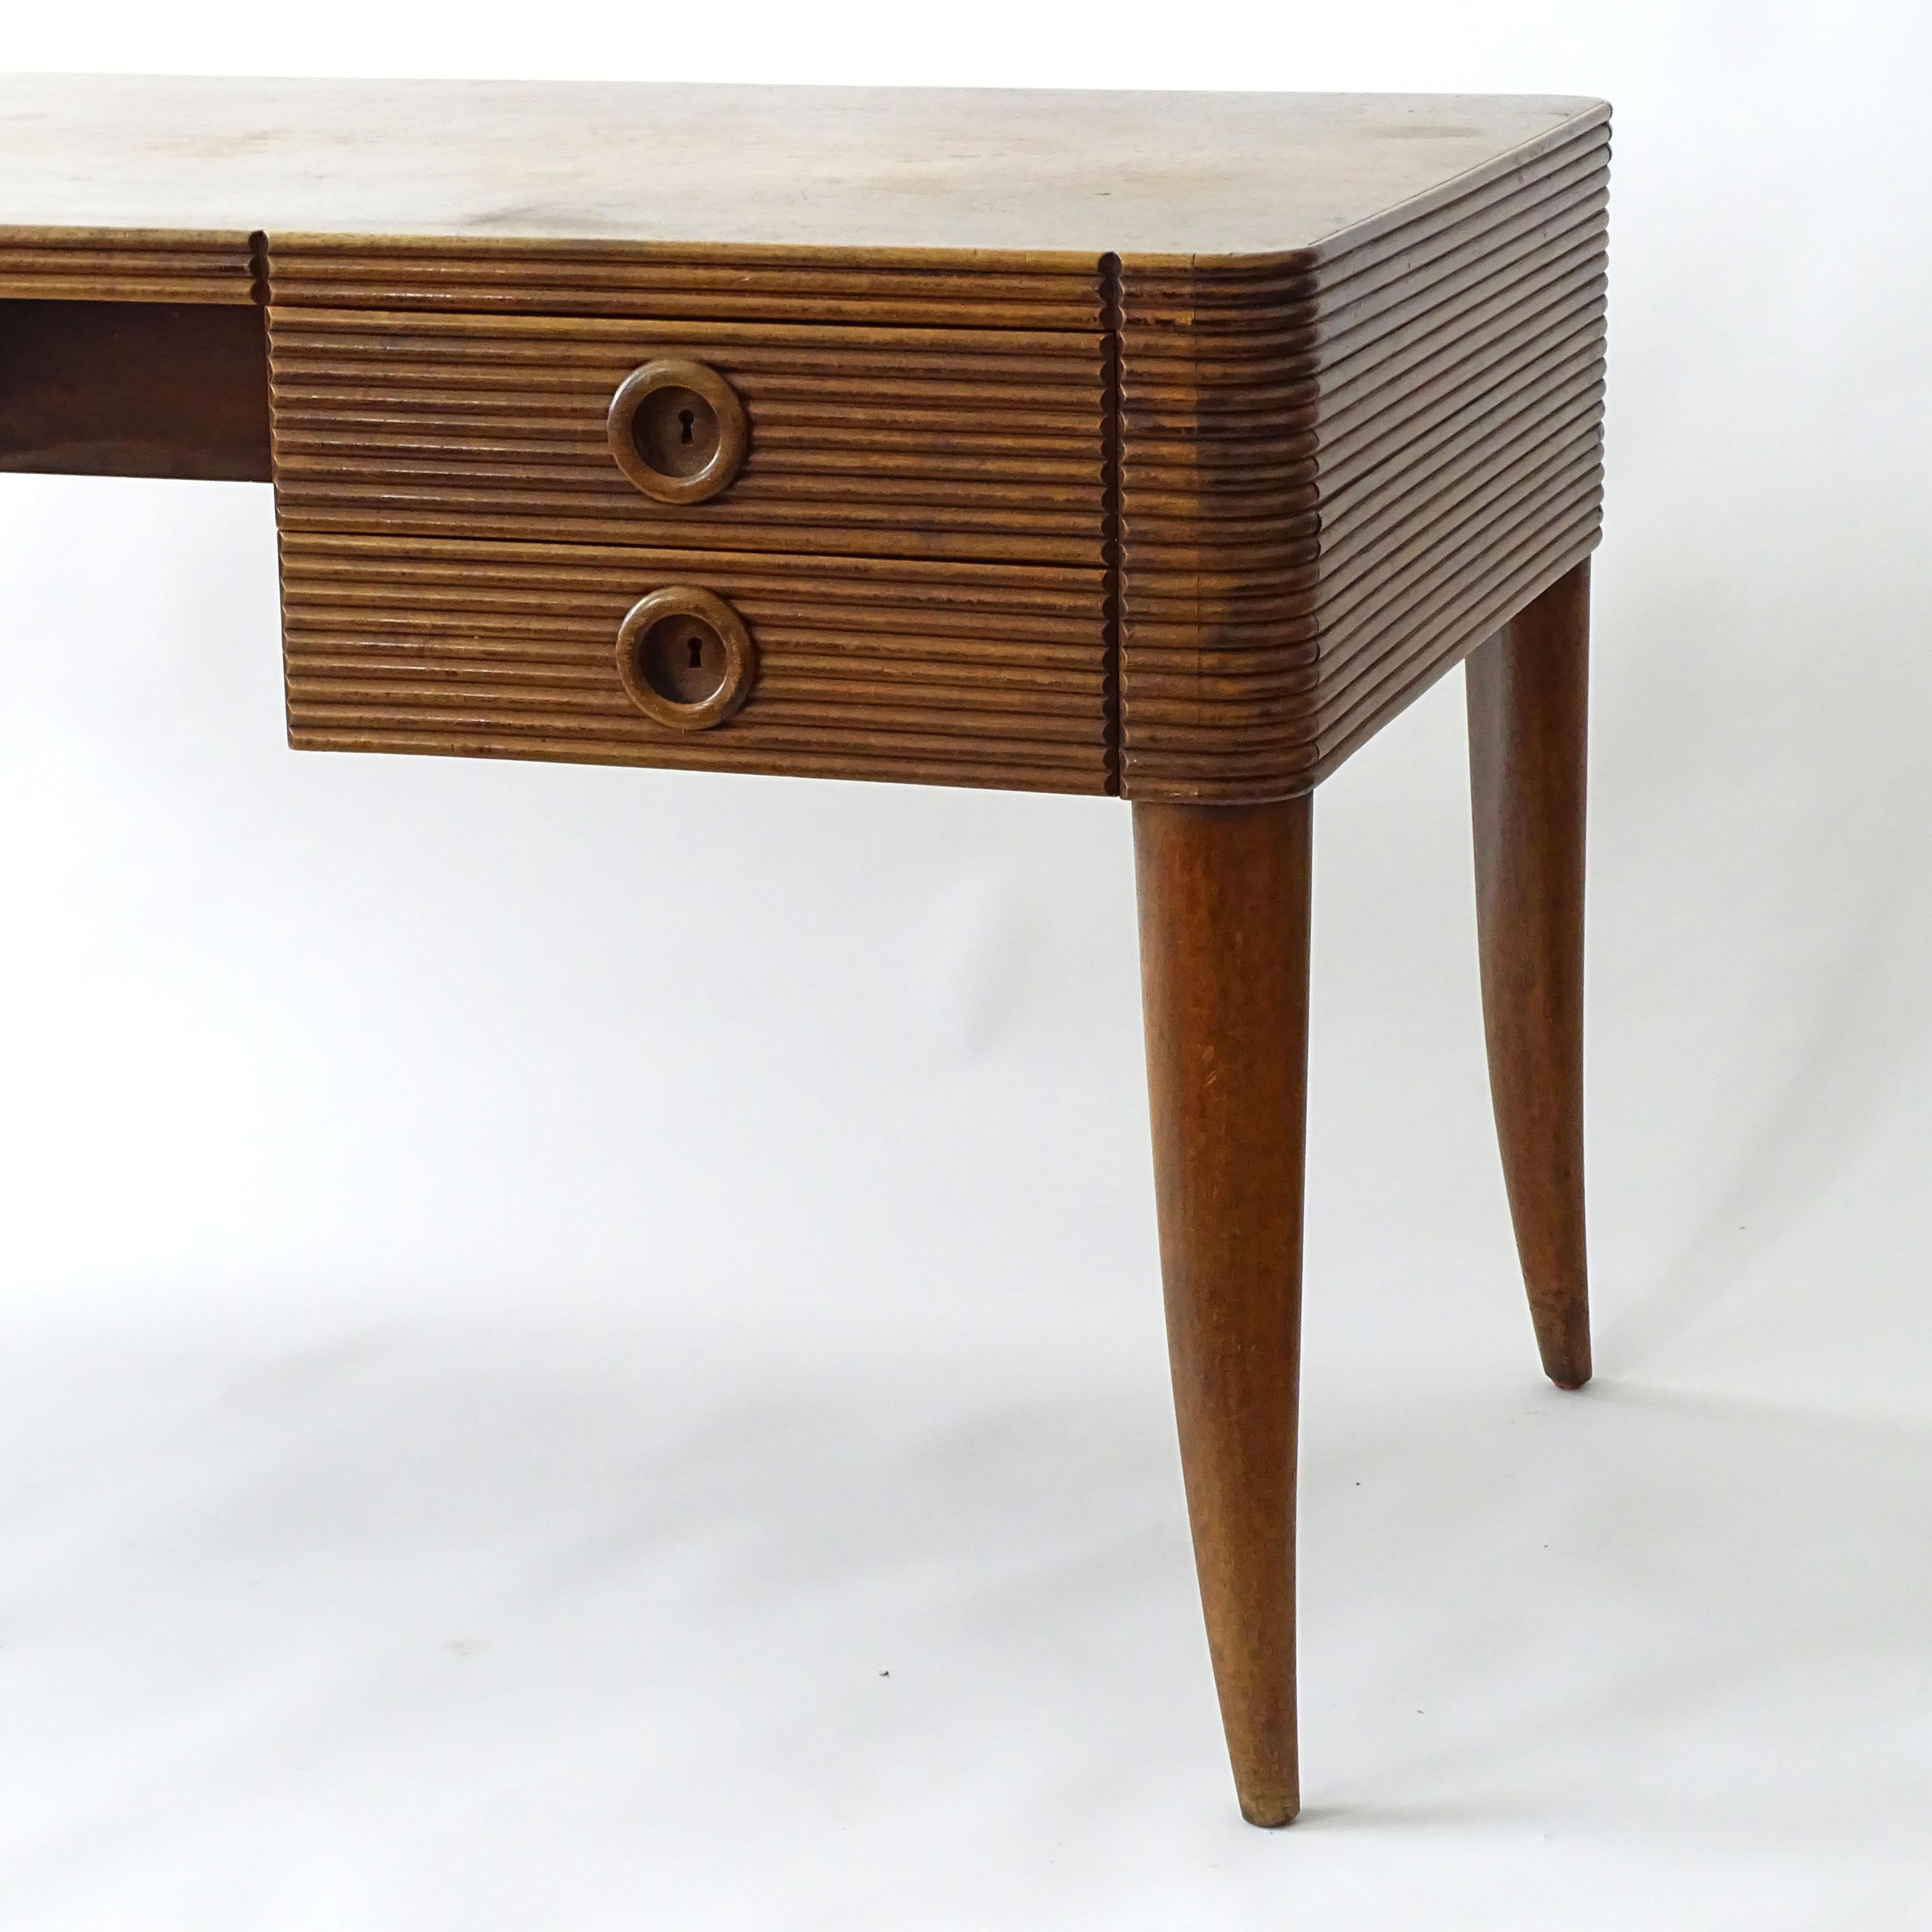 Paolo Buffa grissinato wood desk with four drawers, Italy 1940s For Sale 1